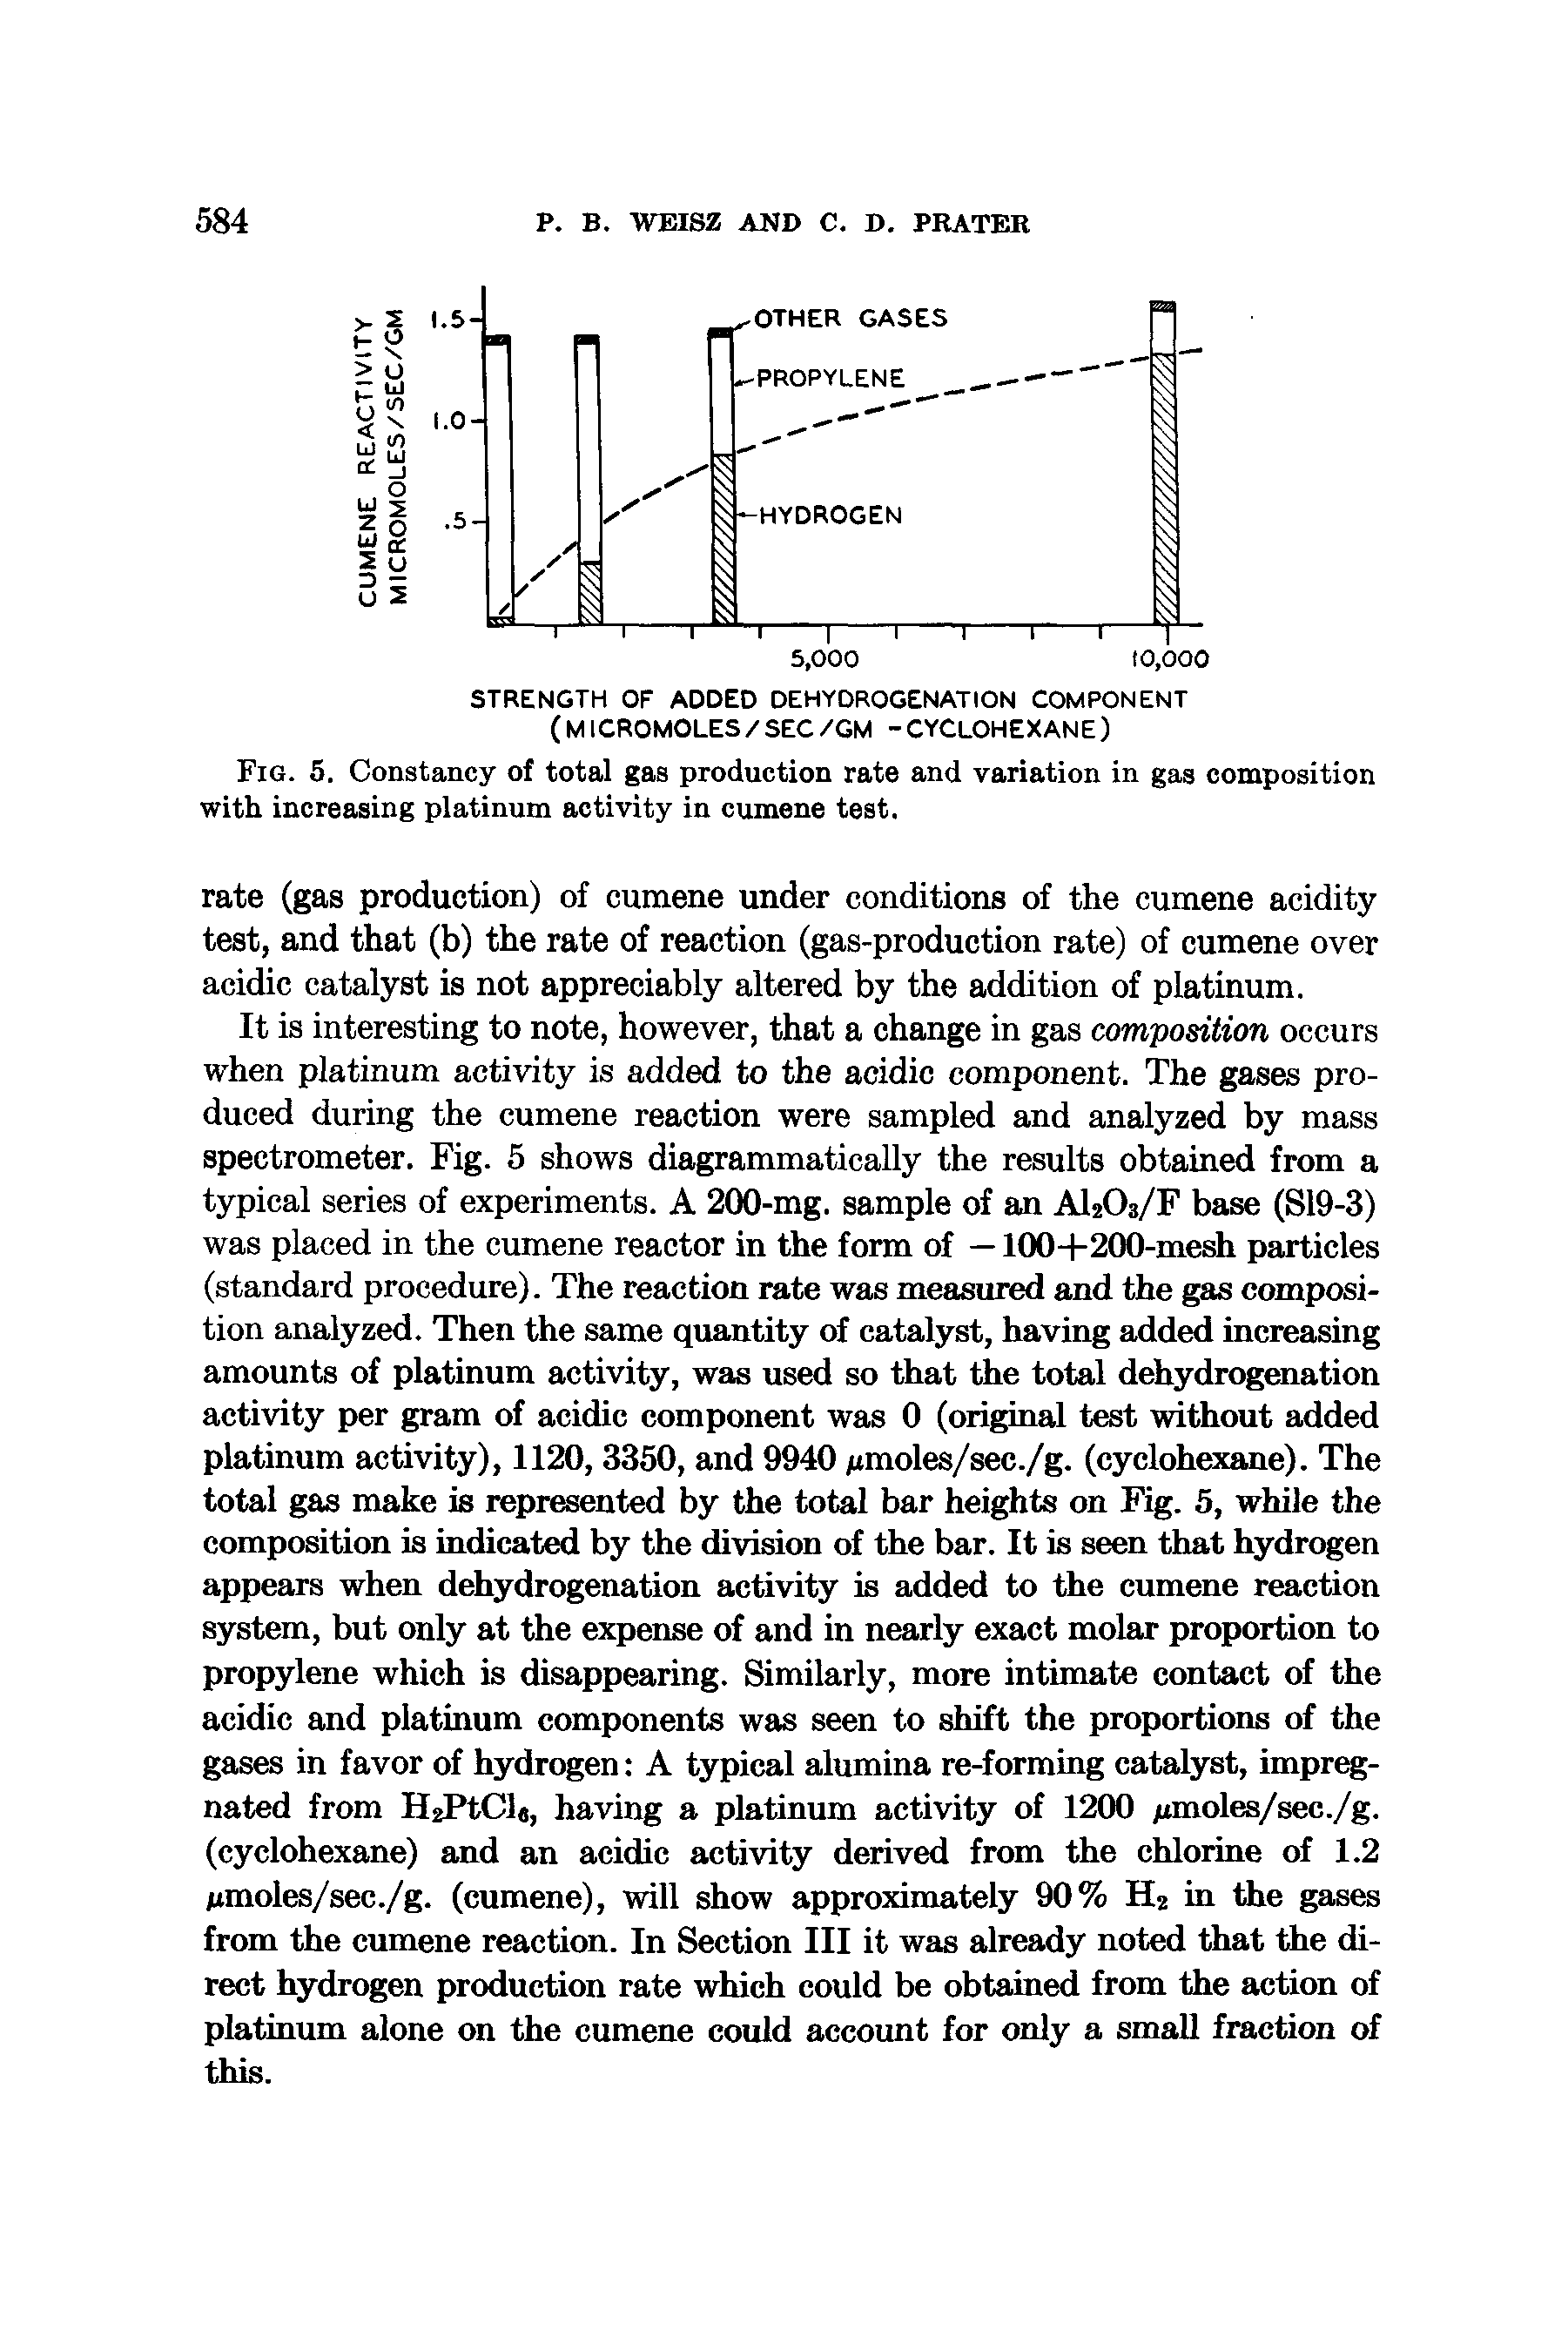 Fig. 5. Constancy of total gas production rate and variation in gas composition with increasing platinum activity in cumene test.